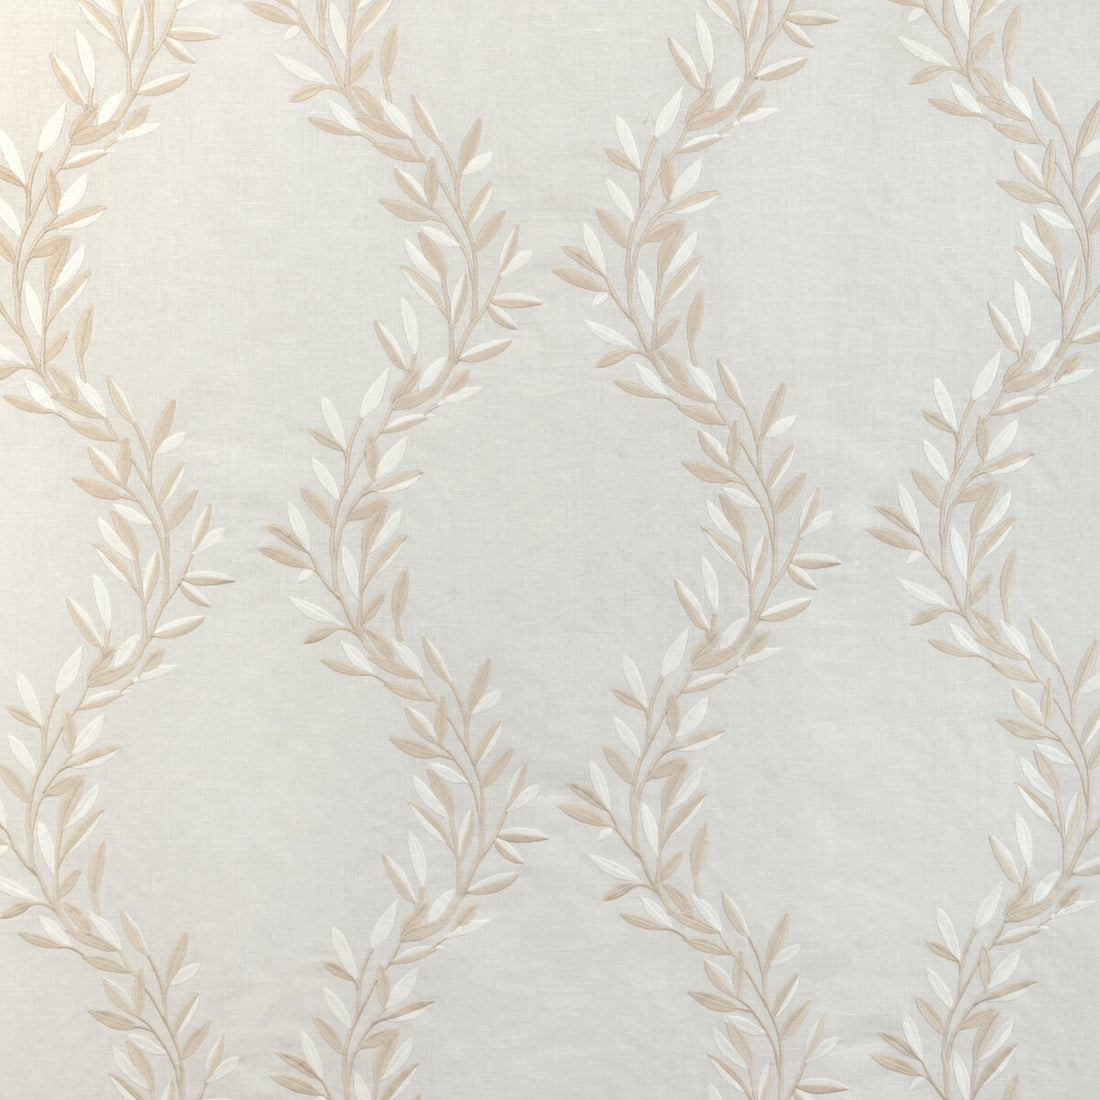 Leaf Frame fabric in ivory color - pattern 36942.161.0 - by Kravet Design in the Alexa Hampton collection